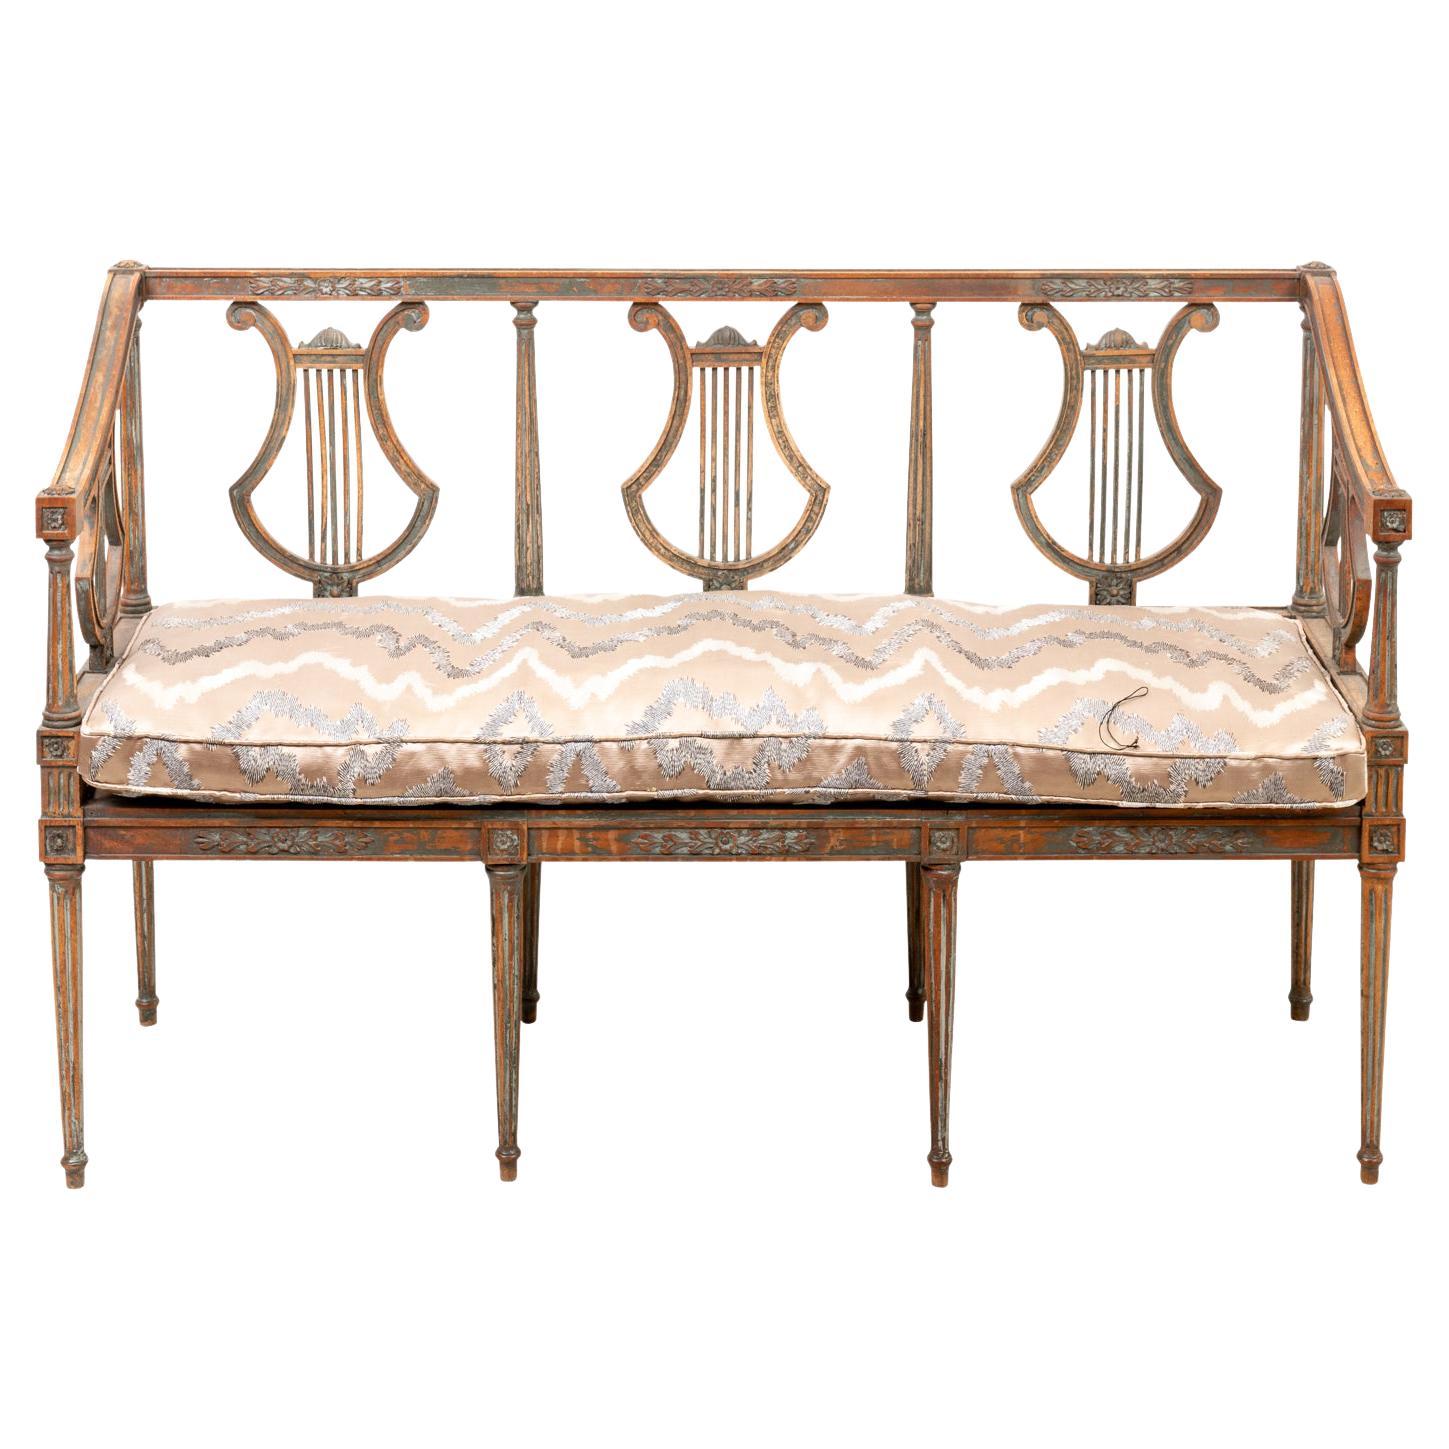 Louis XVI Neoclassical Style Lyre Back Bench